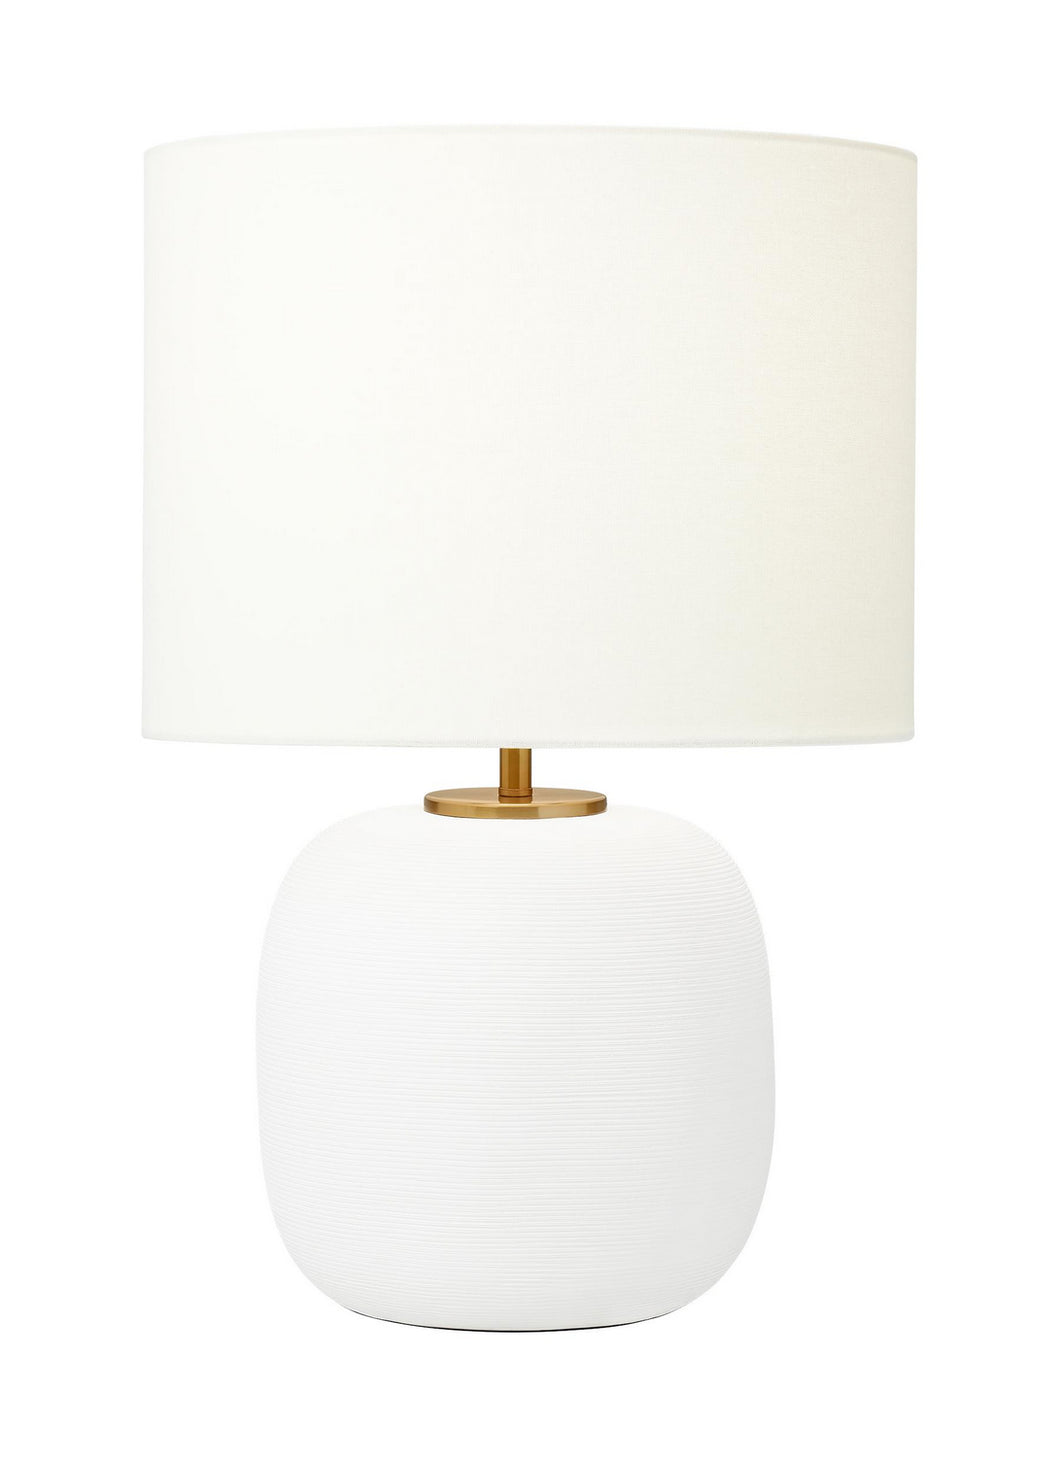 Generation Lighting - HT1071MWC1 - One Light Table Lamp - Fanny